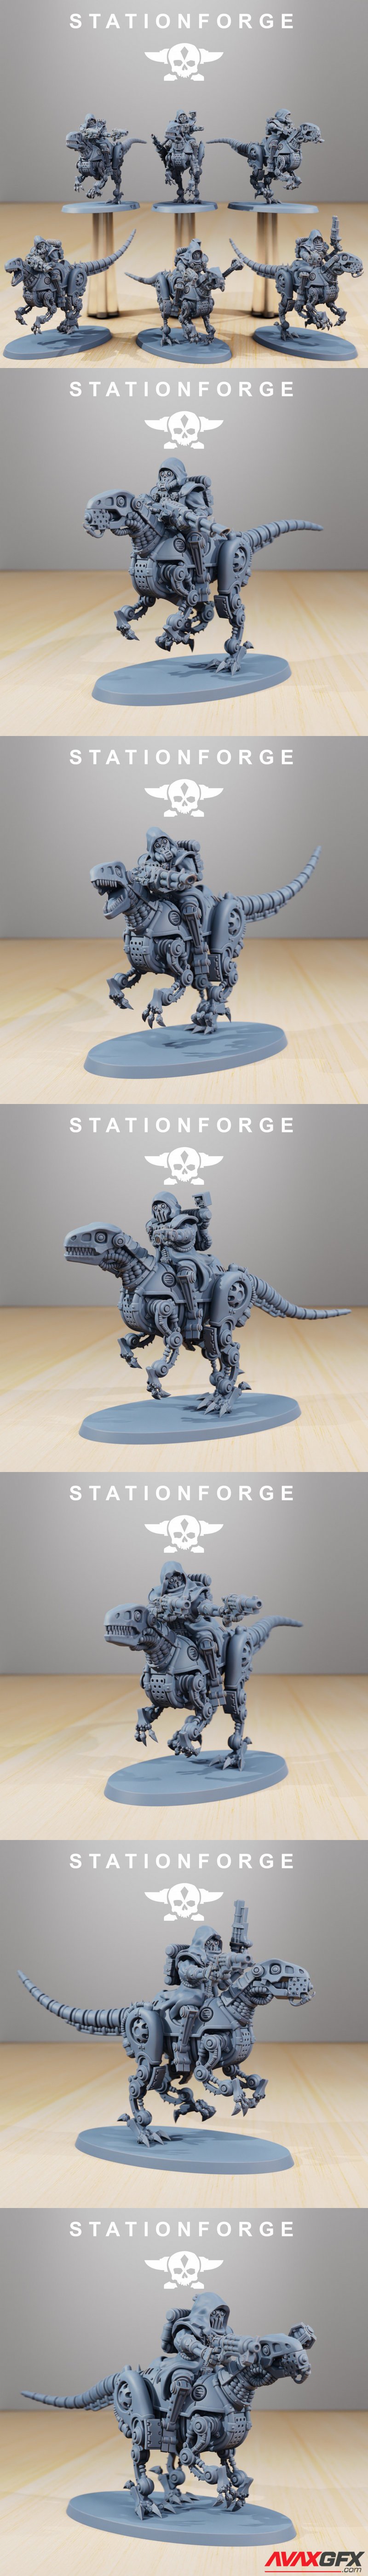 Station Forge - Scavenger Riders